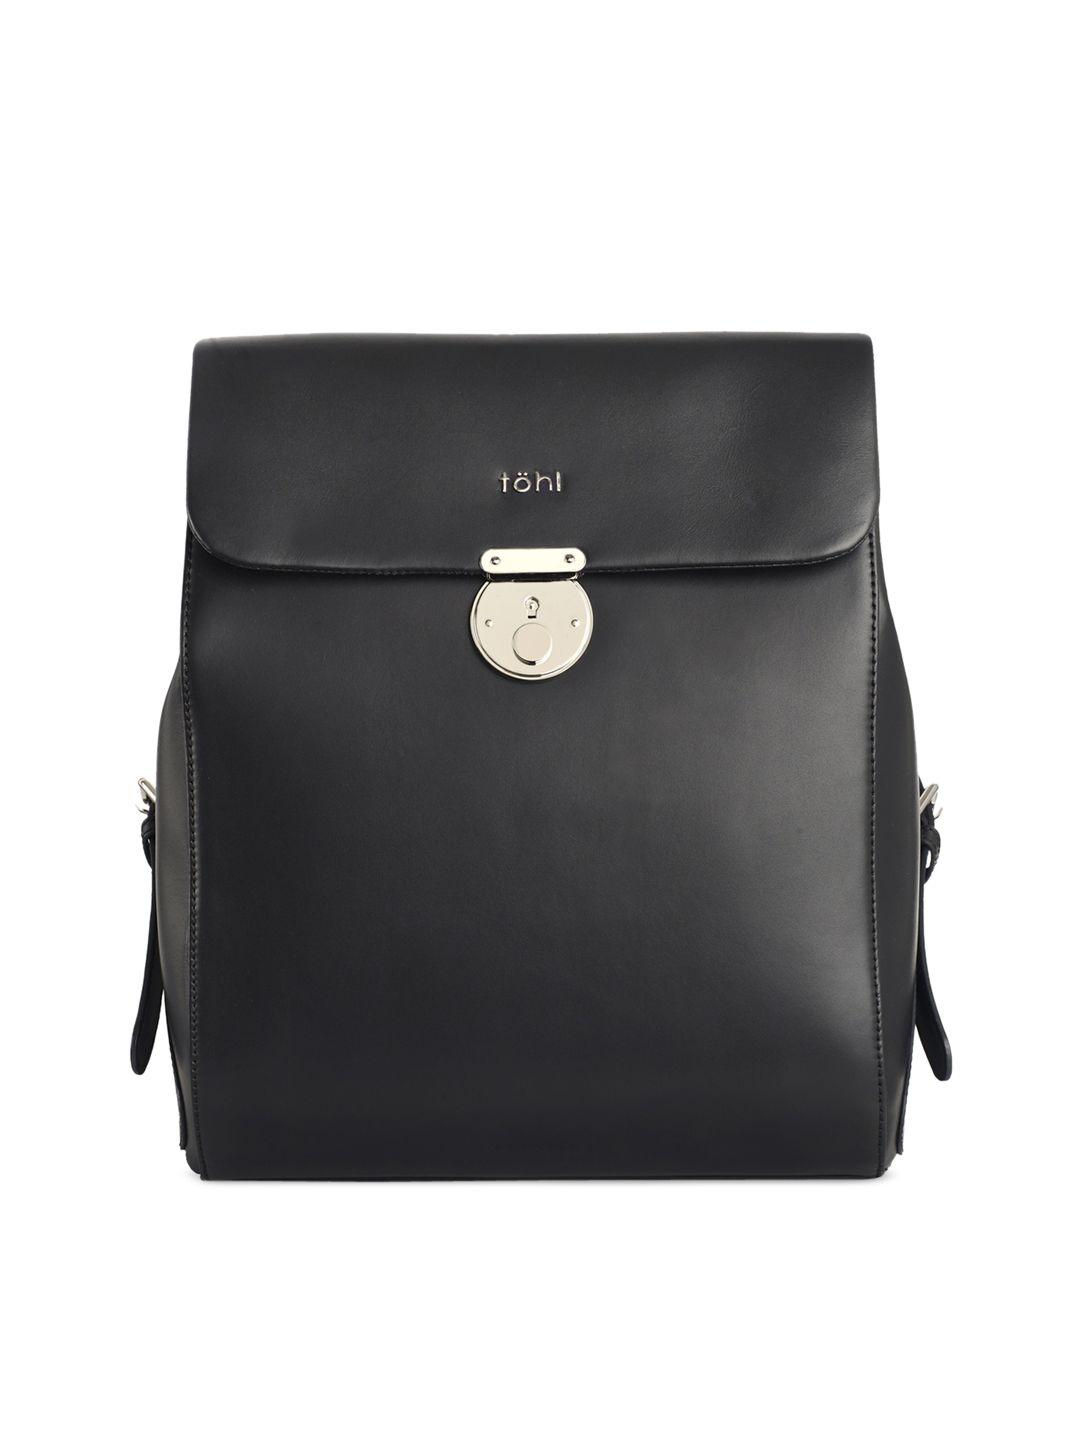 tohl women black solid leather backpack